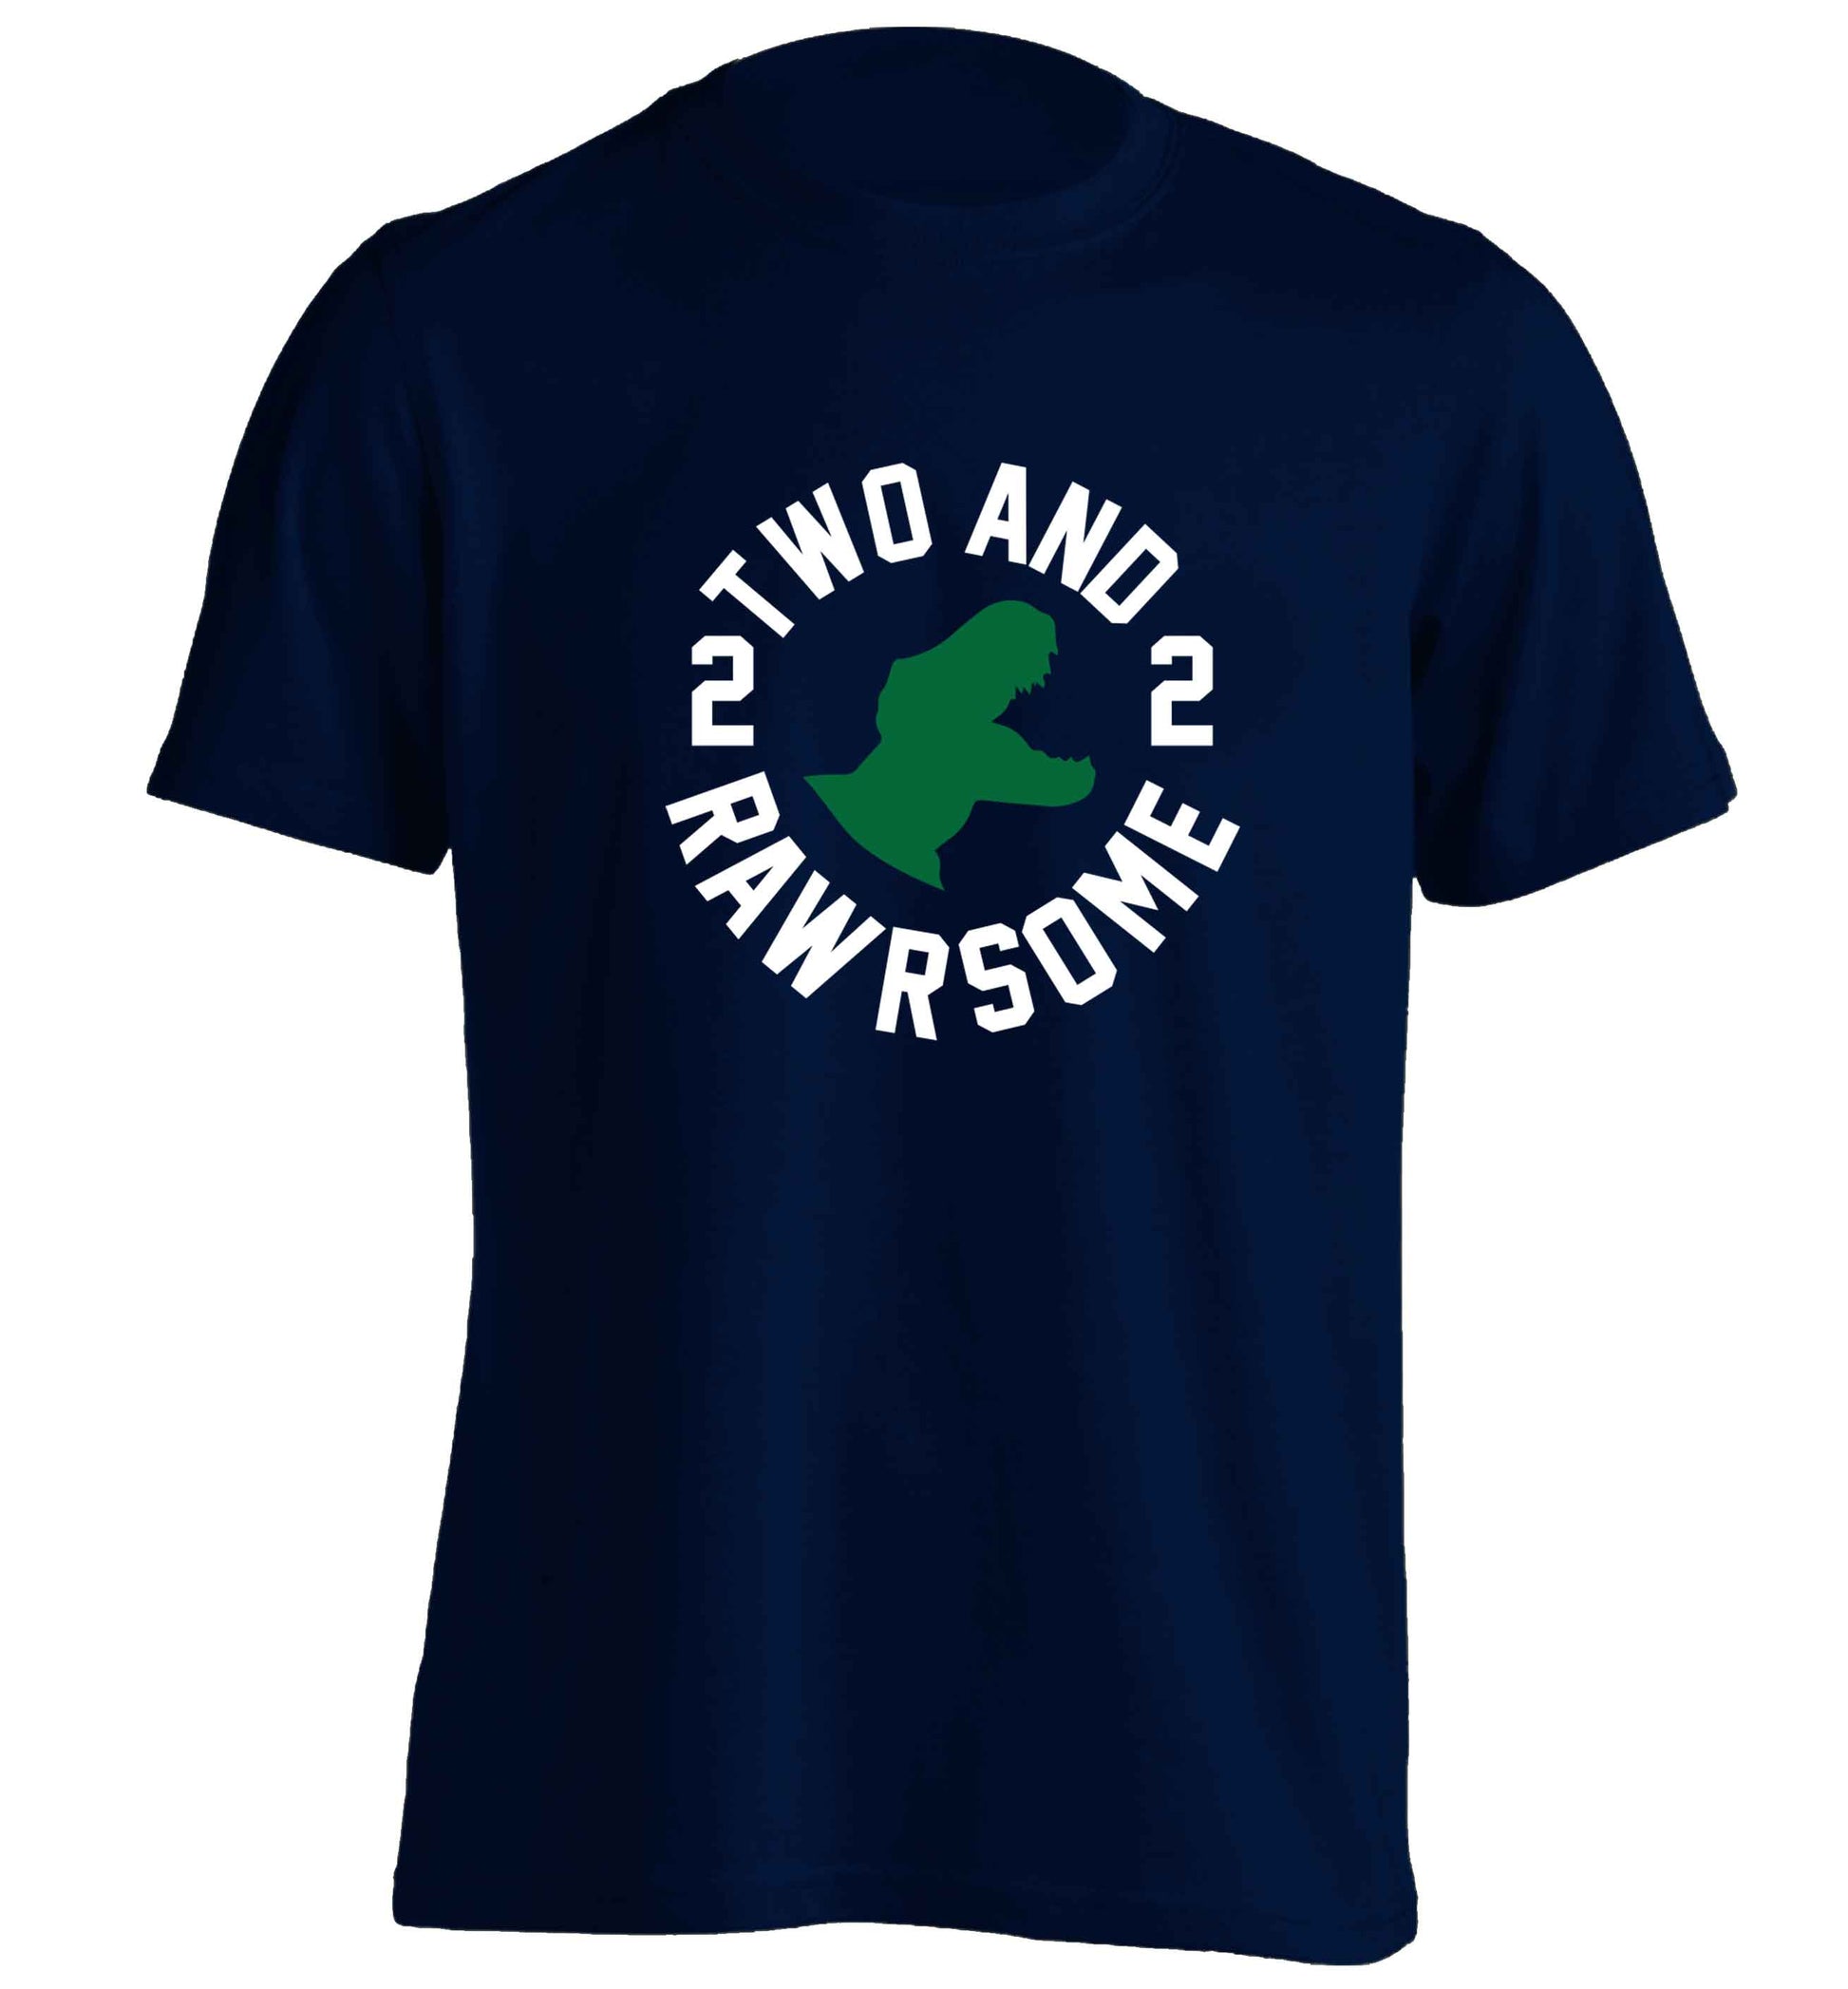 Two and rawrsome adults unisex navy Tshirt 2XL